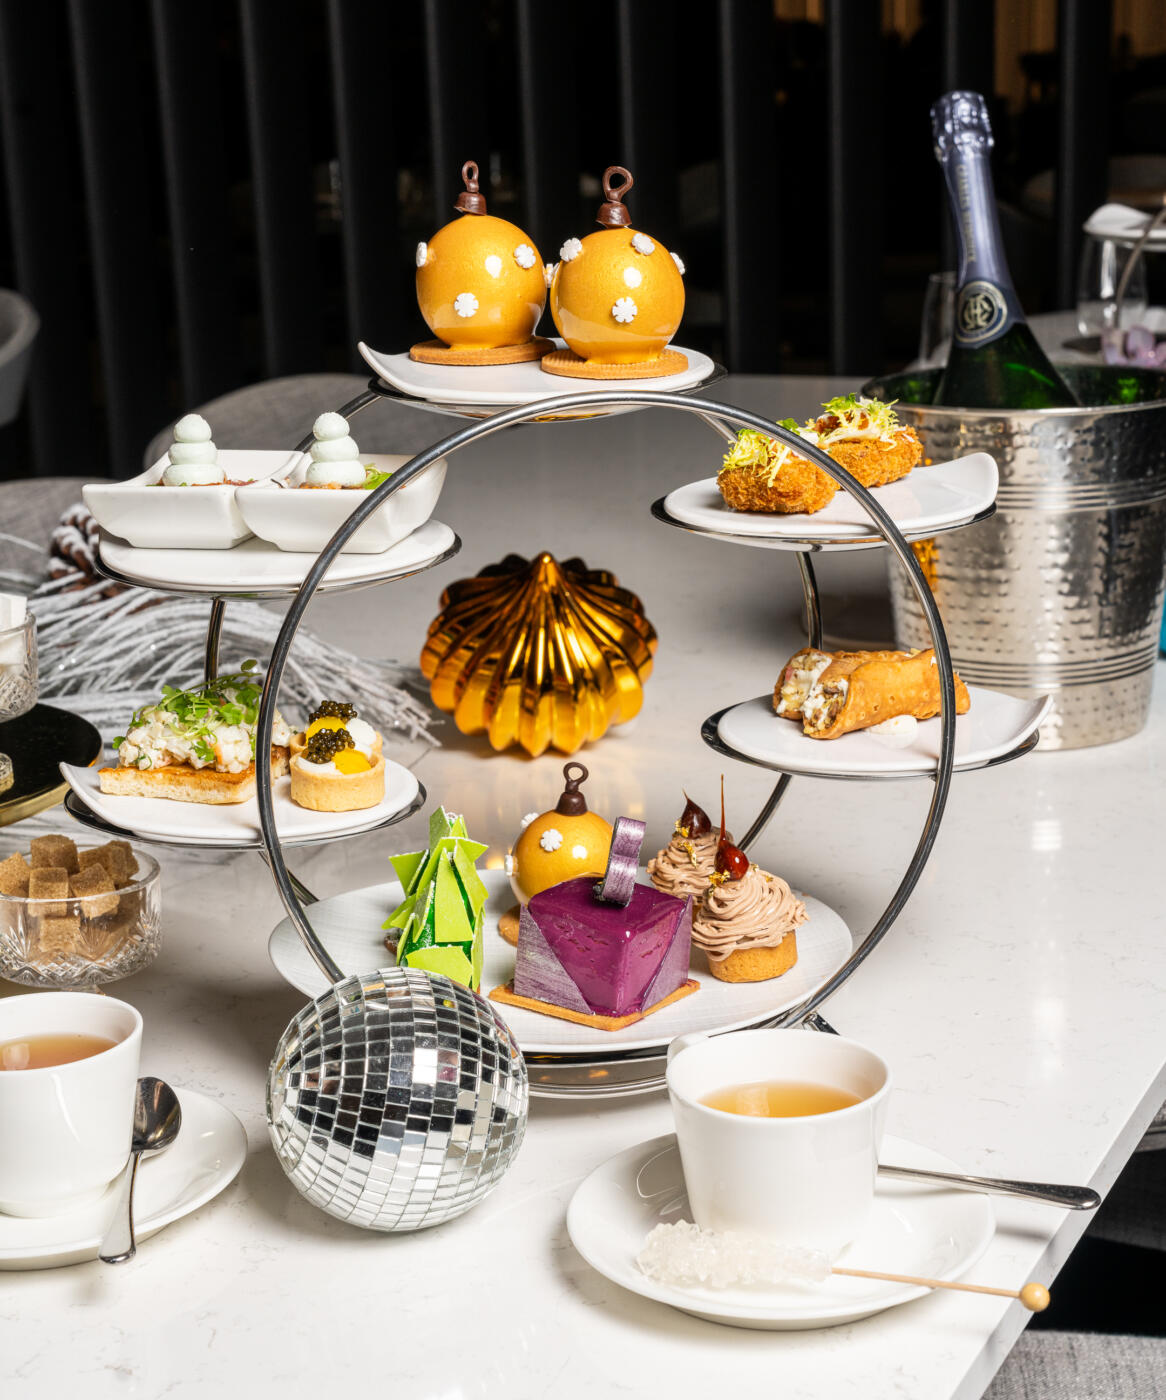 Afternoon holiday tea at Four Seasons Chicago